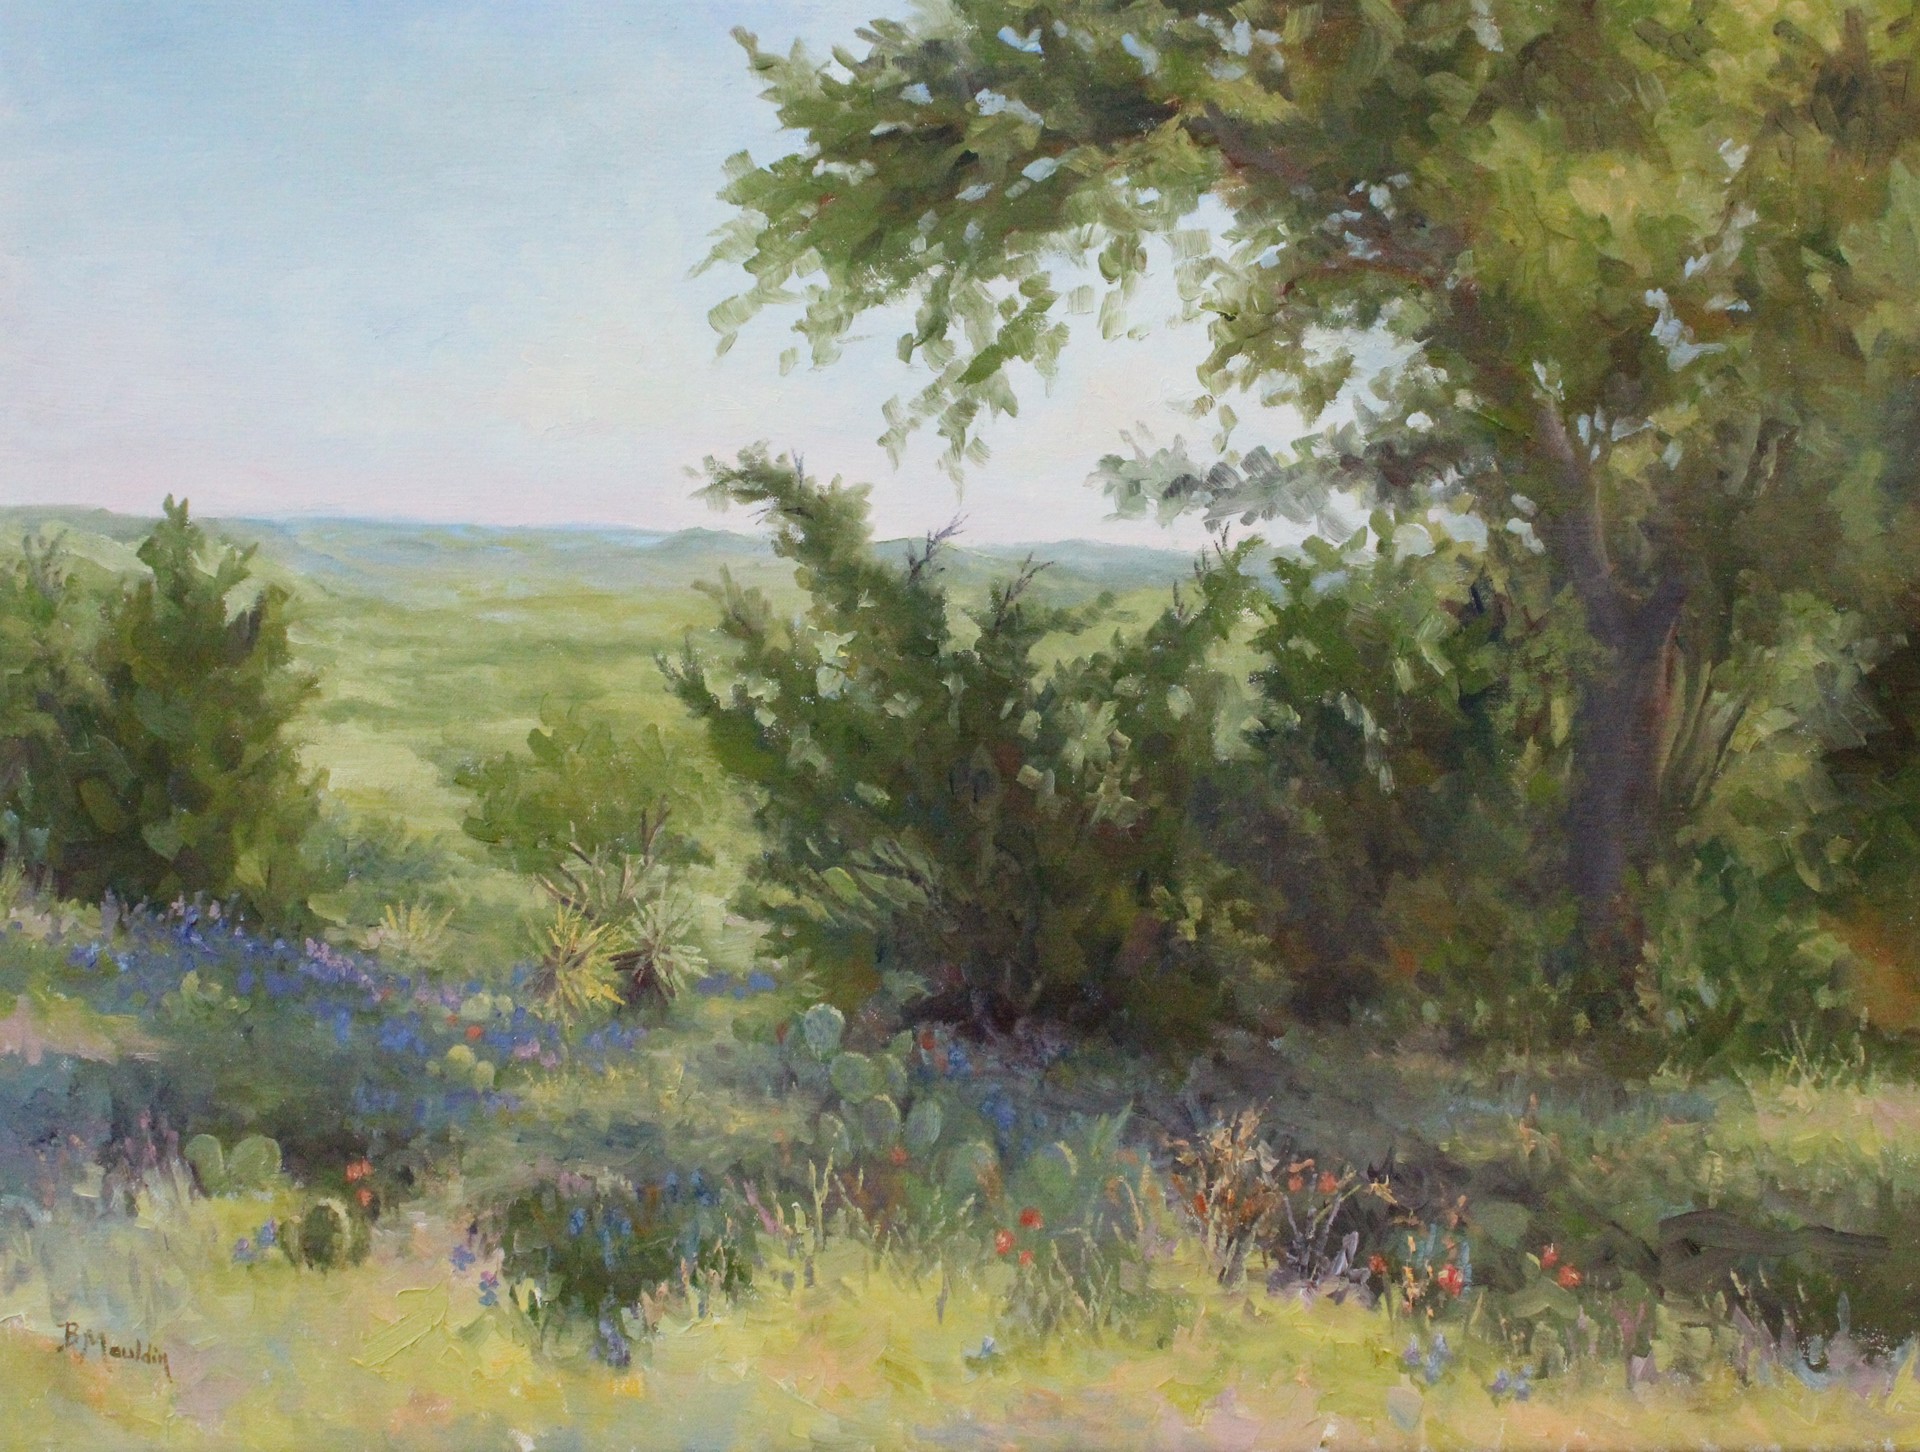 Hilltop View by Barbara Mauldin